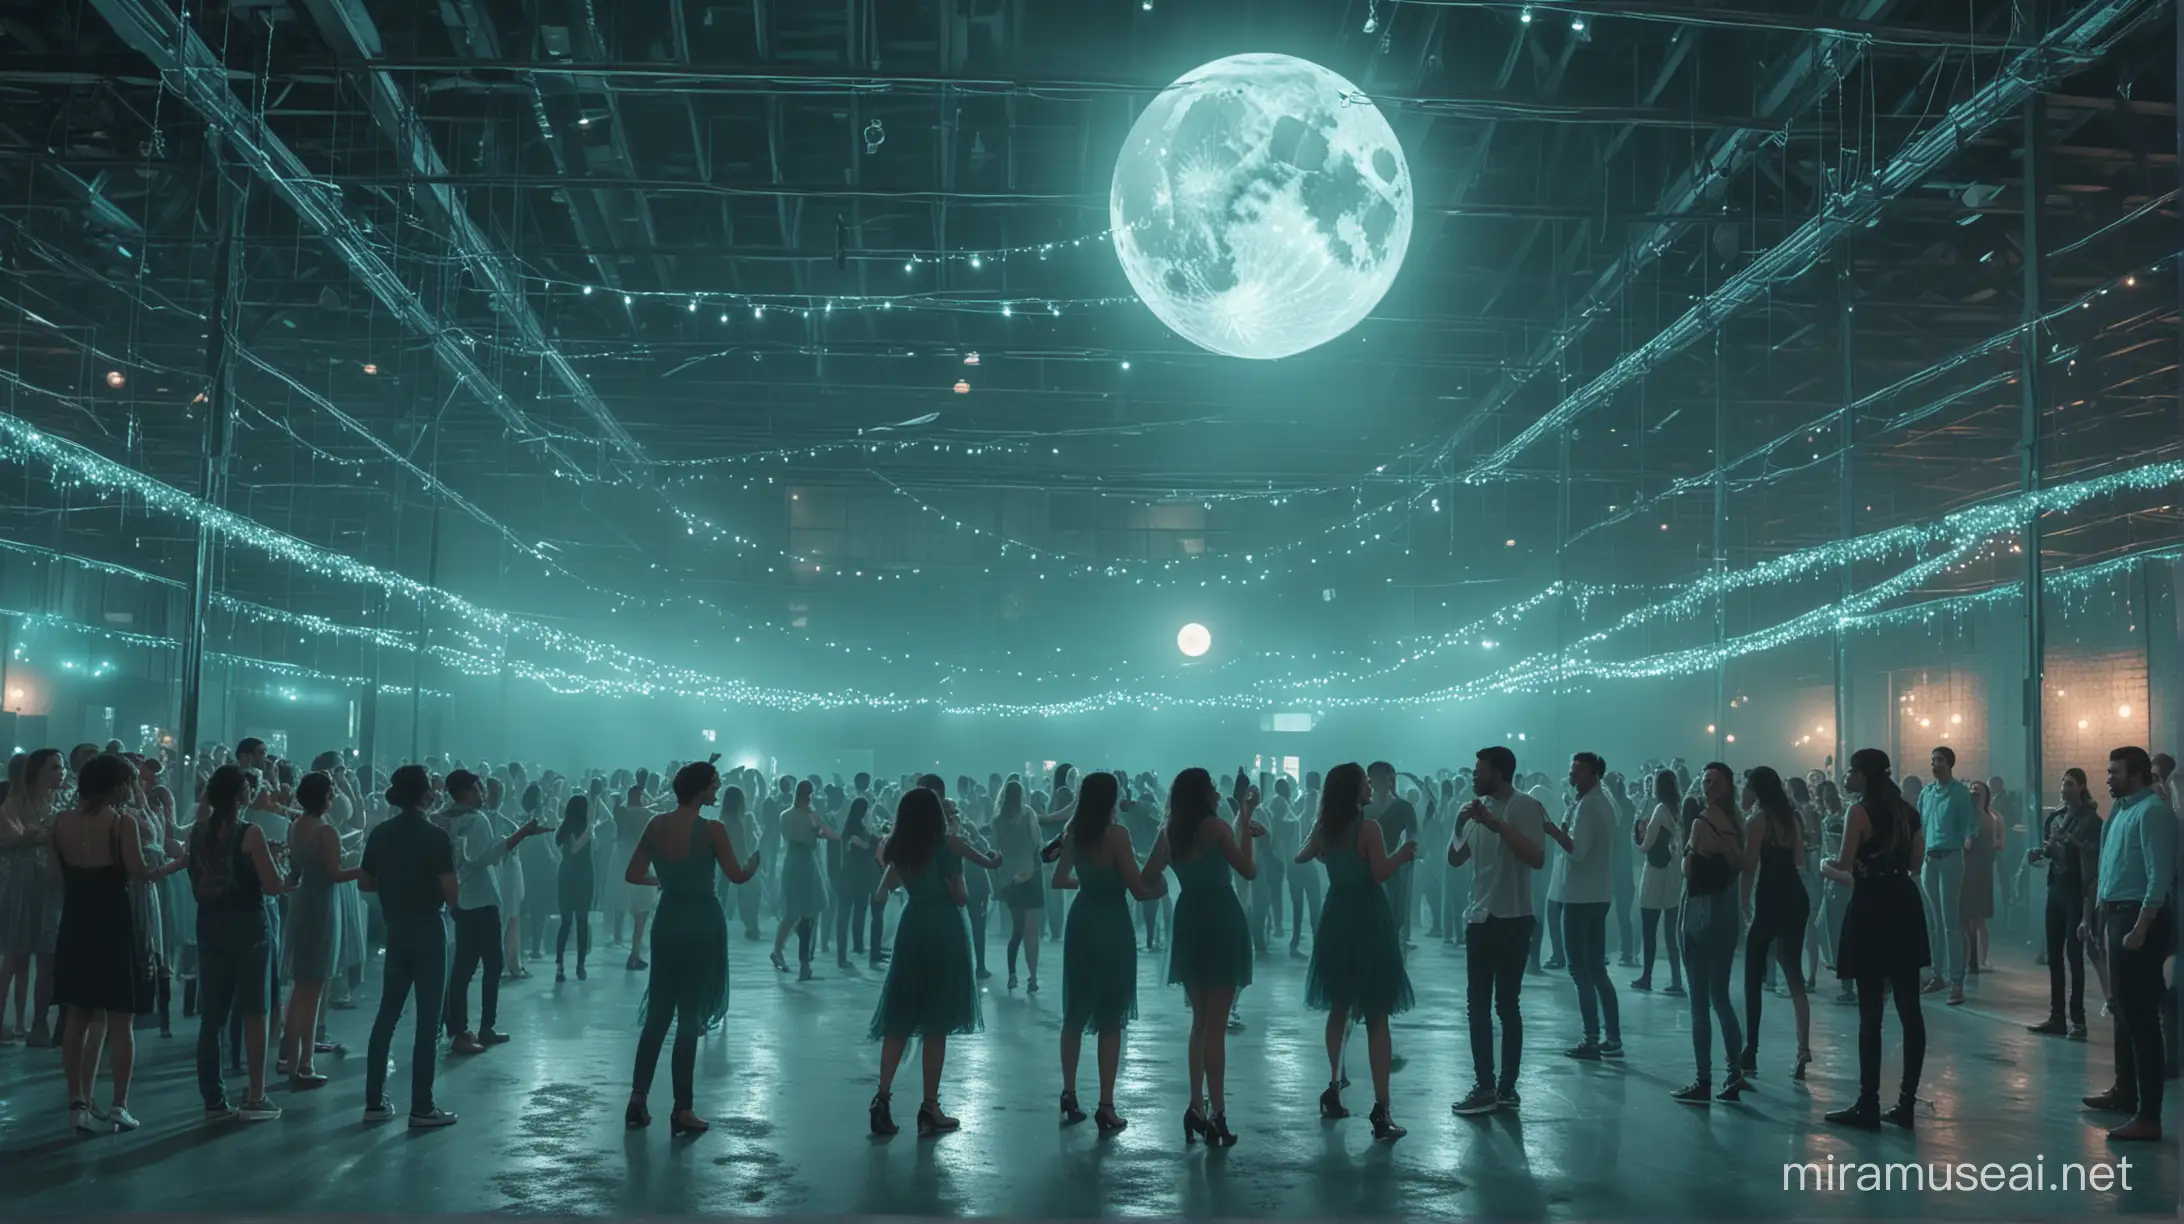 An old warehouse in the night hosting a party with a crowd off diverse gen-z people dancing under one giant moon, illuminating in a turquoise color, and hanging under the ceilling. The room is filled with a foggy atmosphere. The room is decorate with stylish silver foil and turquoise coloured details